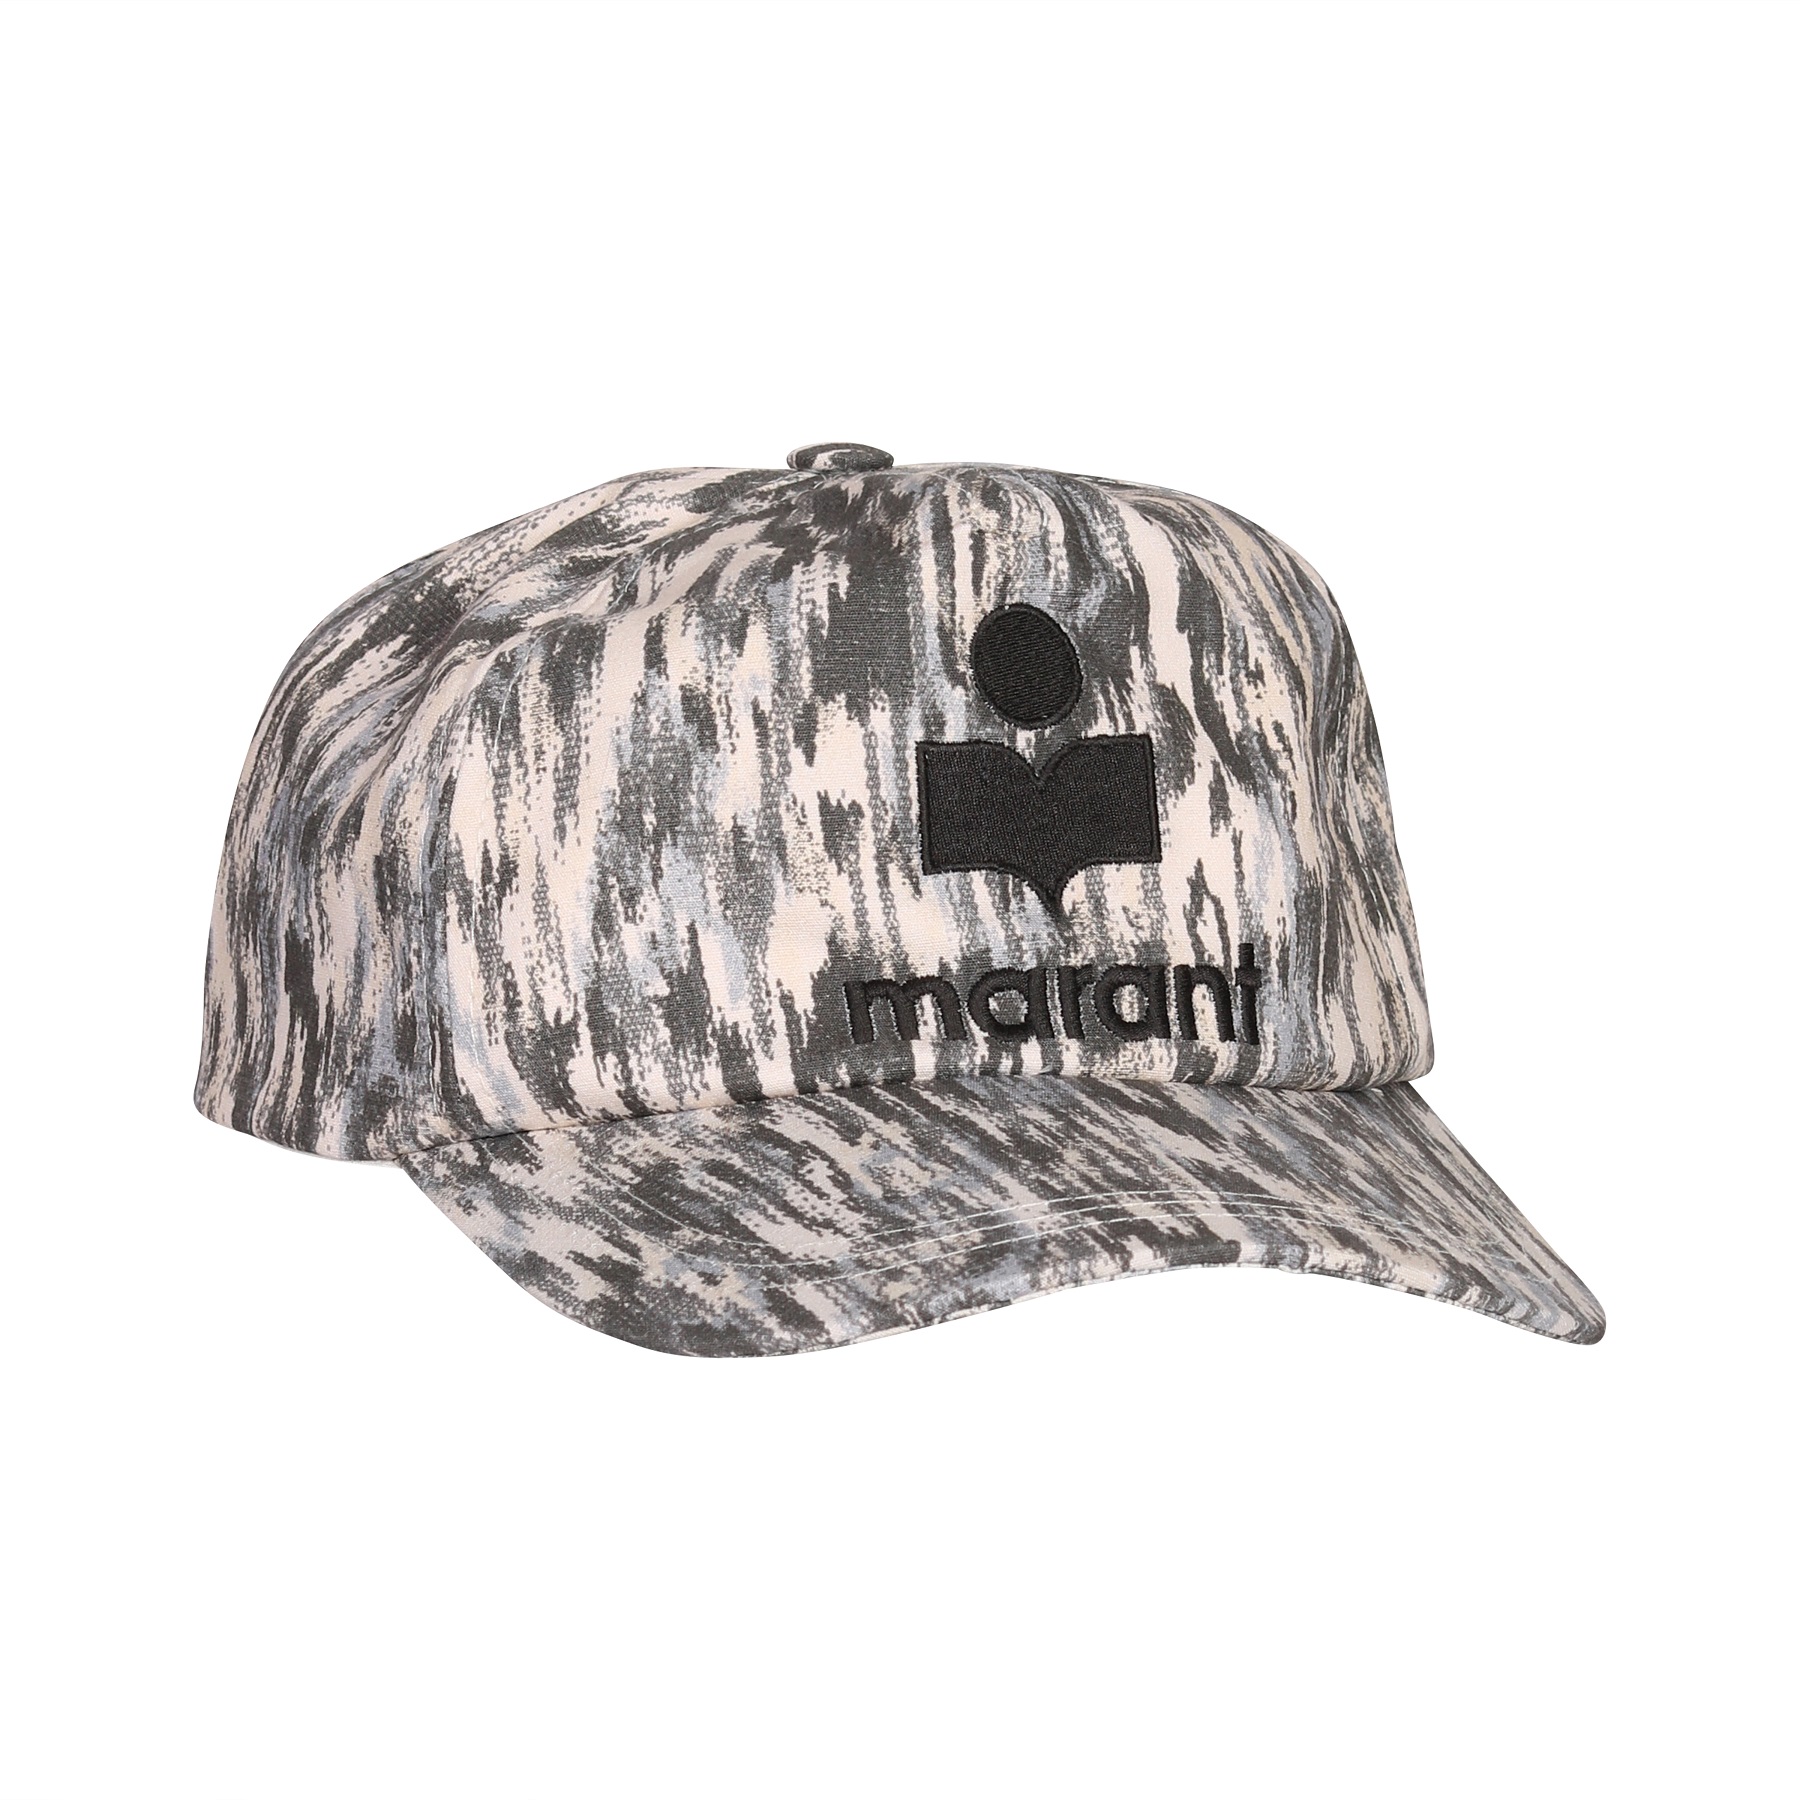 Isabel Marant Tyronh Cap in Anthracite